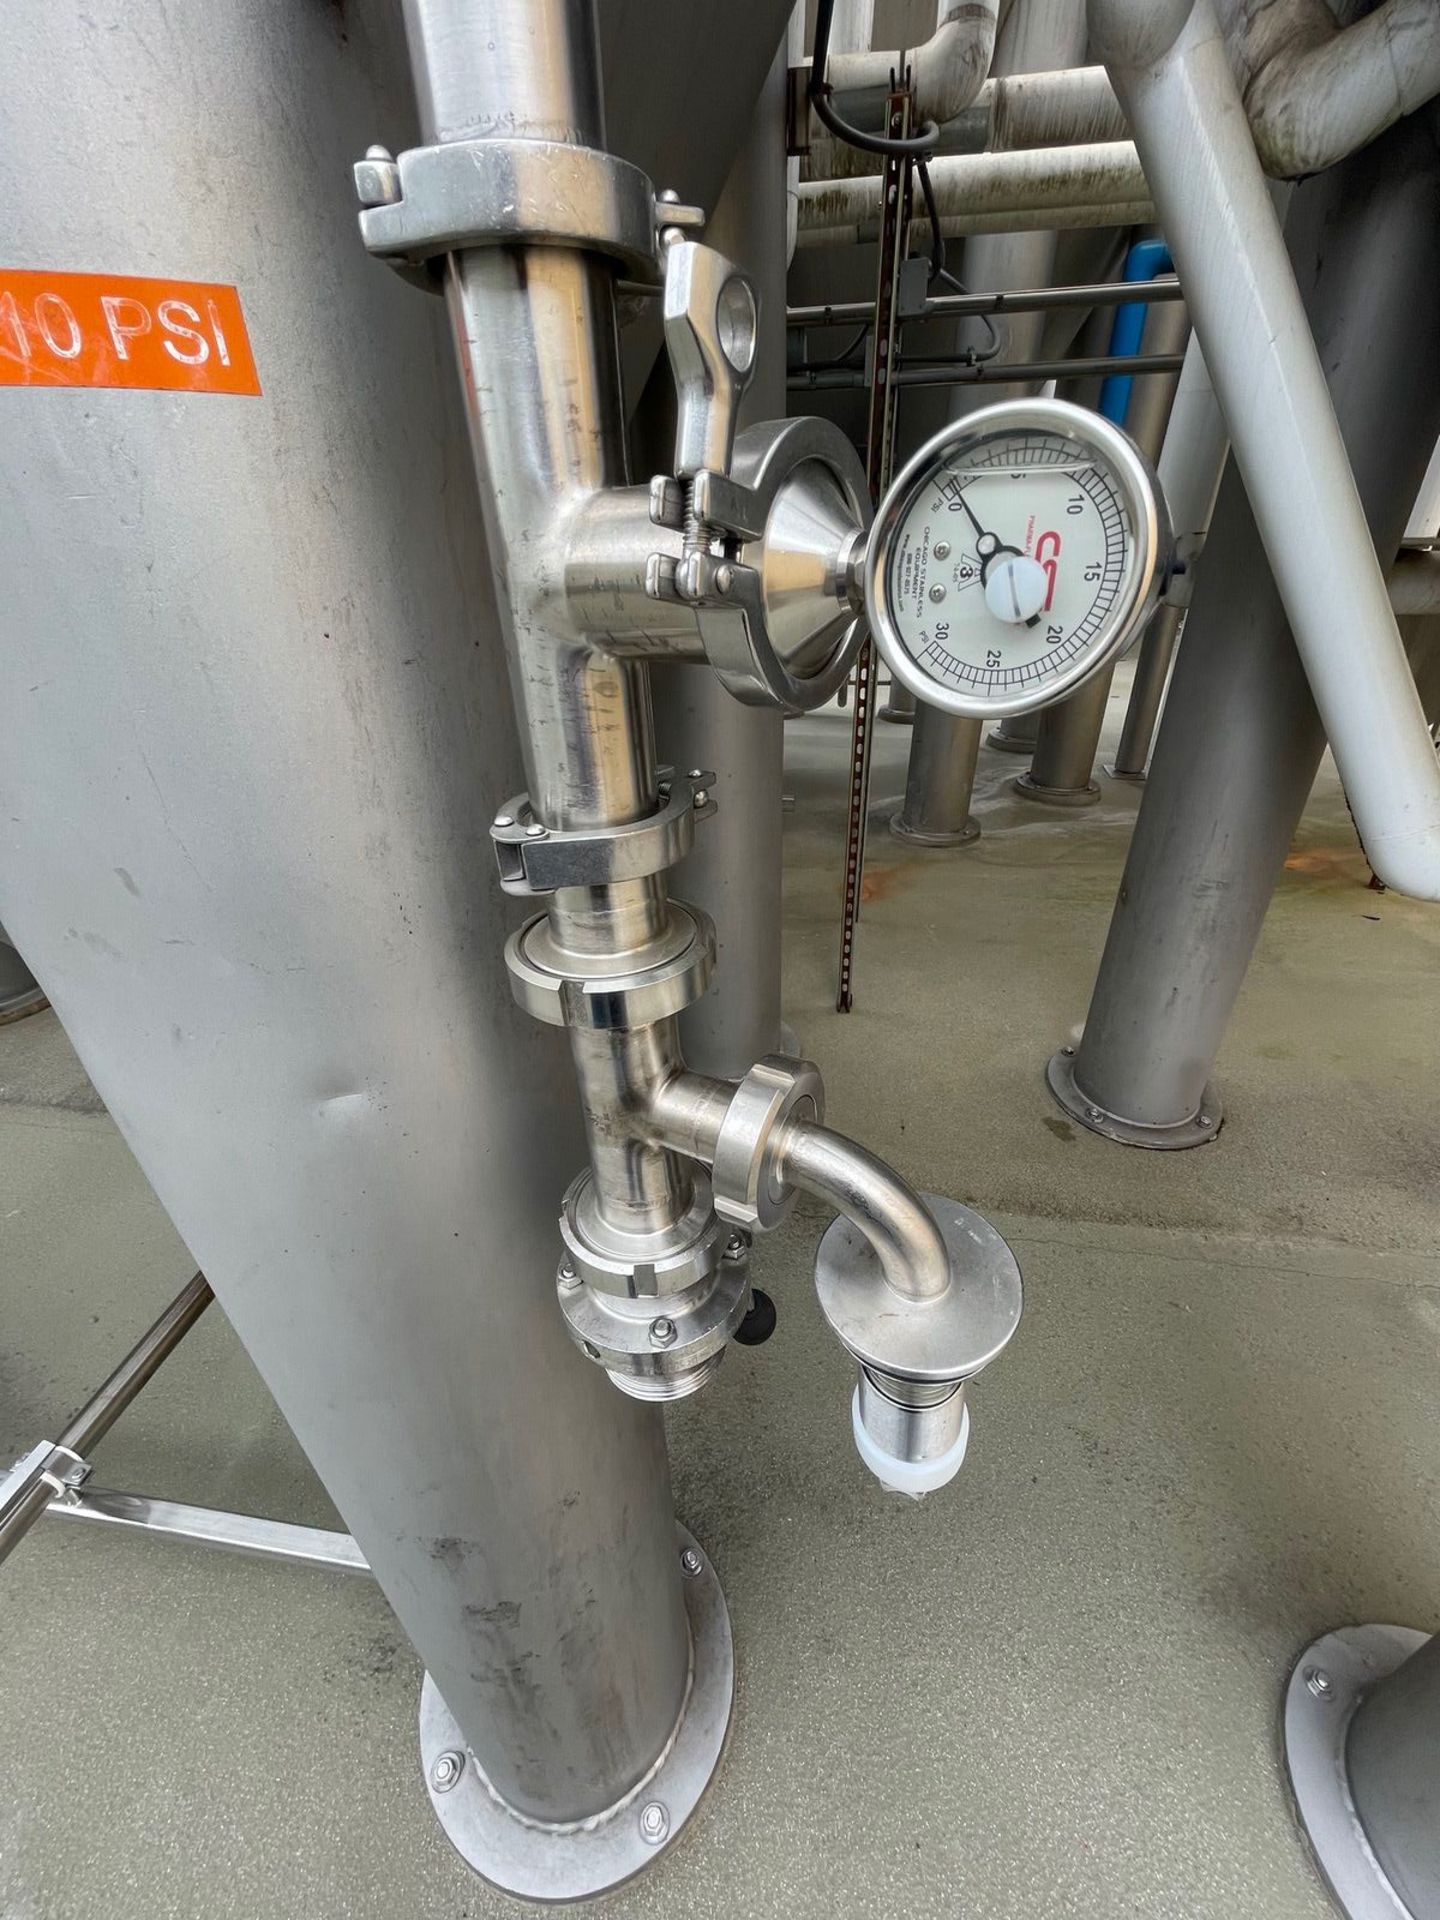 MUELLER 155 BBL UNITANK FERMENTER WITH 20 PSI RATING (5000 GALLON JACKETED TANK) | Rig Fee: 2500 - Image 3 of 6